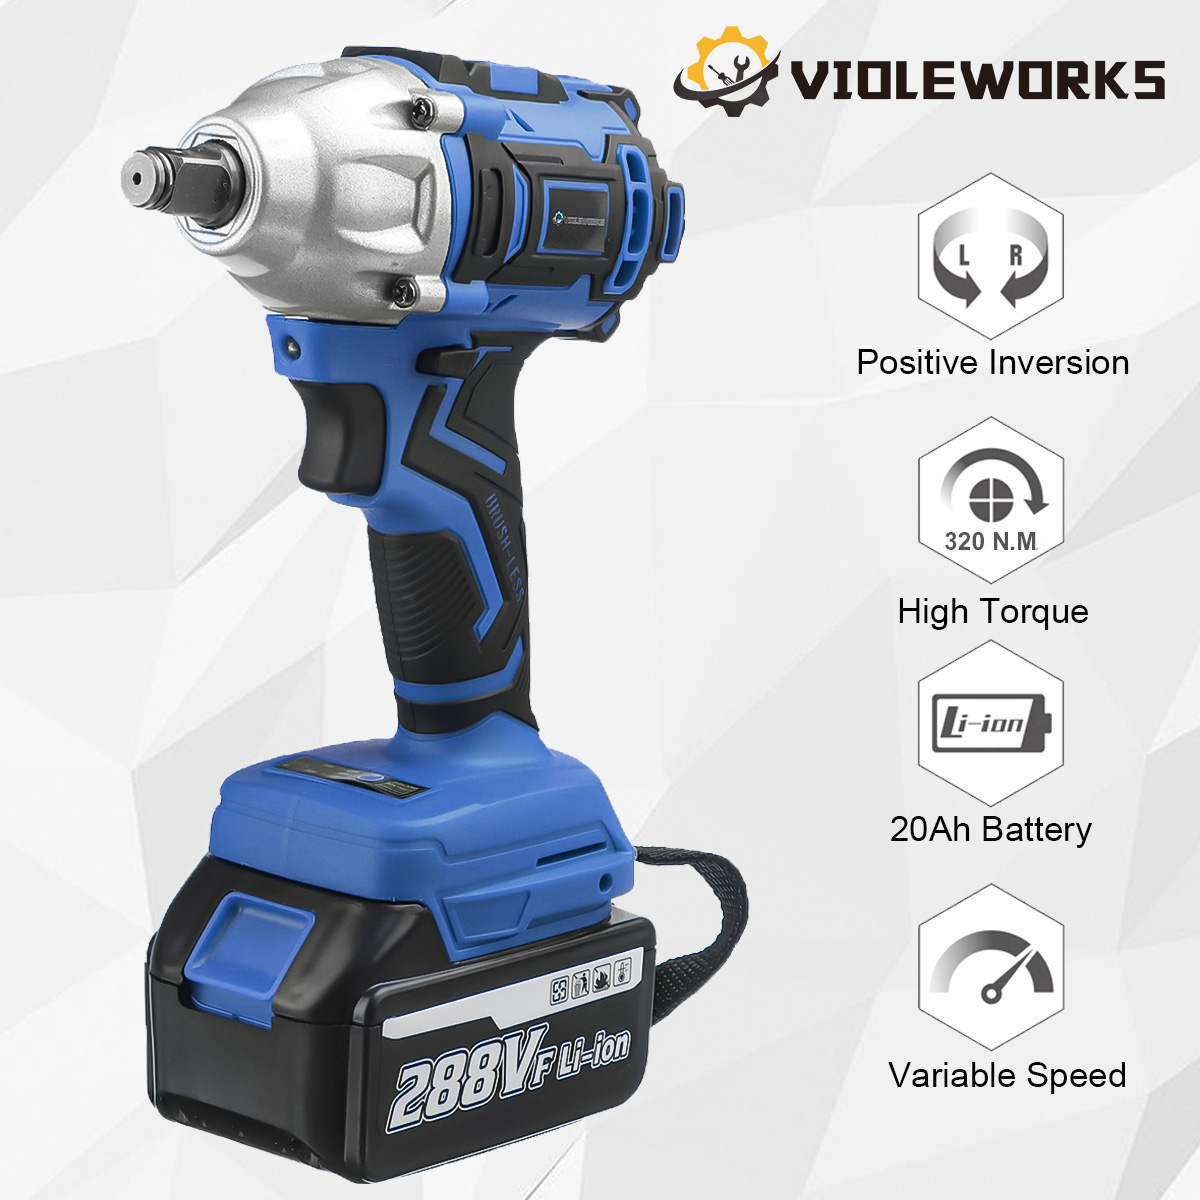 VIOLEWORKS-288VF-12quot-320NM-Electric-Wrench-Cordless-Brushless-Impact-Wrench-With-210-Battery-Also-1833240-3